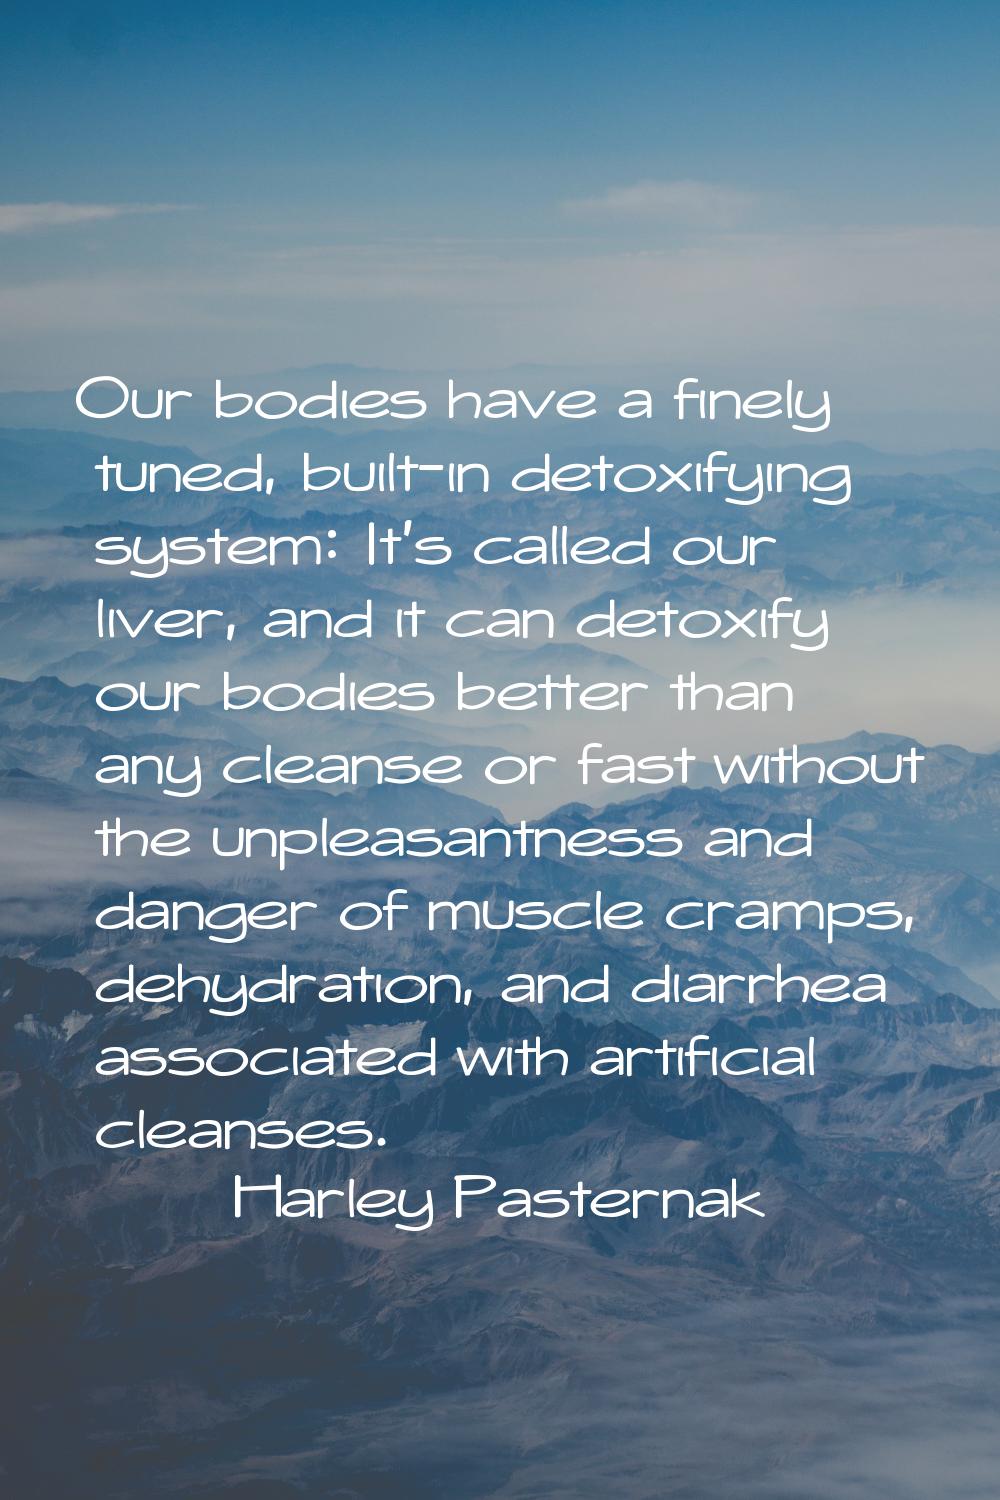 Our bodies have a finely tuned, built-in detoxifying system: It's called our liver, and it can deto